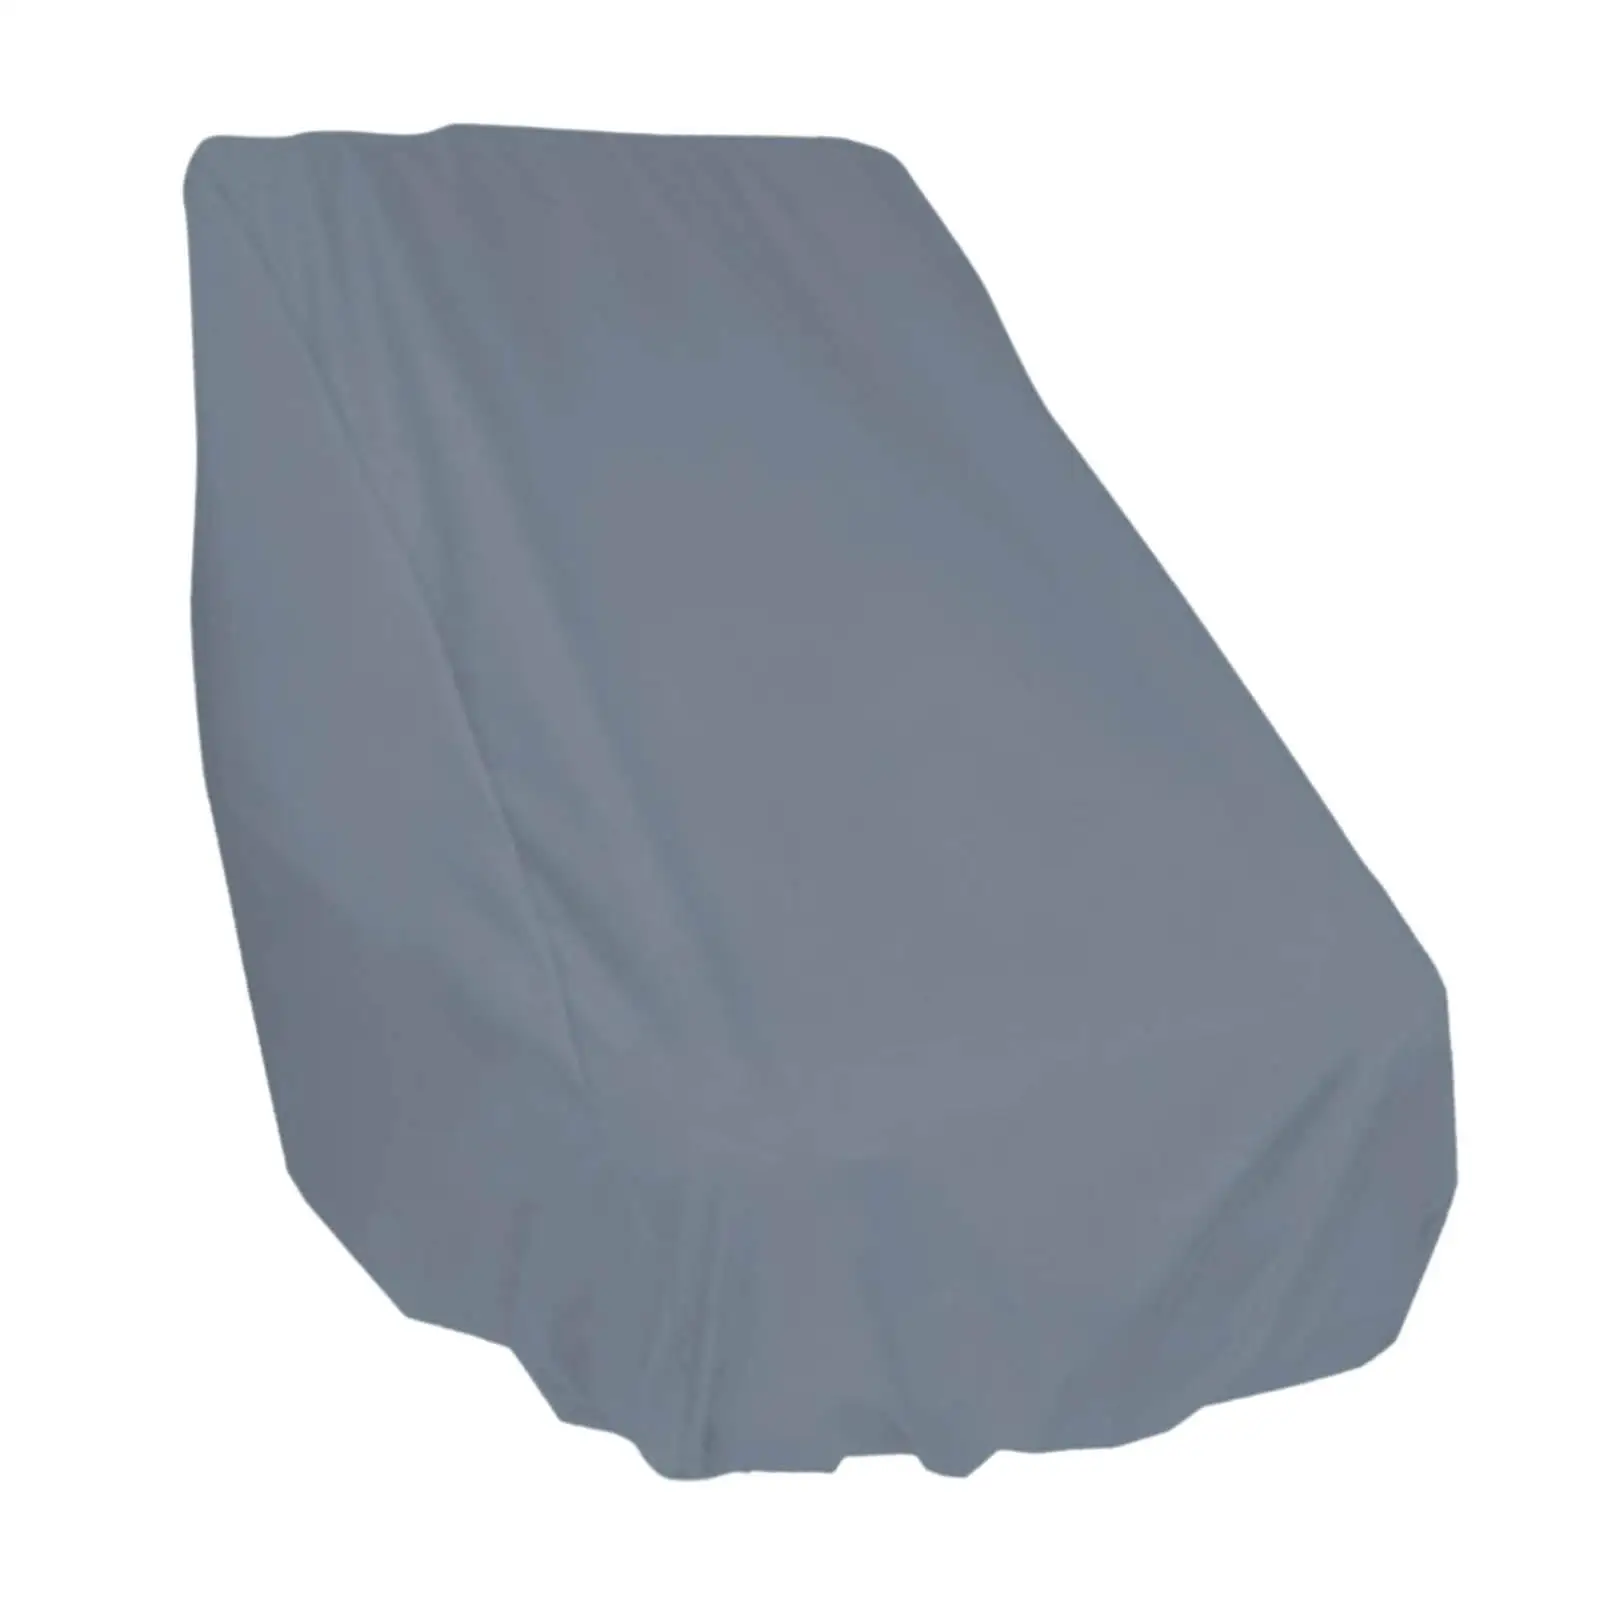 Marine canvas boat seat covers, weather resistant fabric protects the captain`s